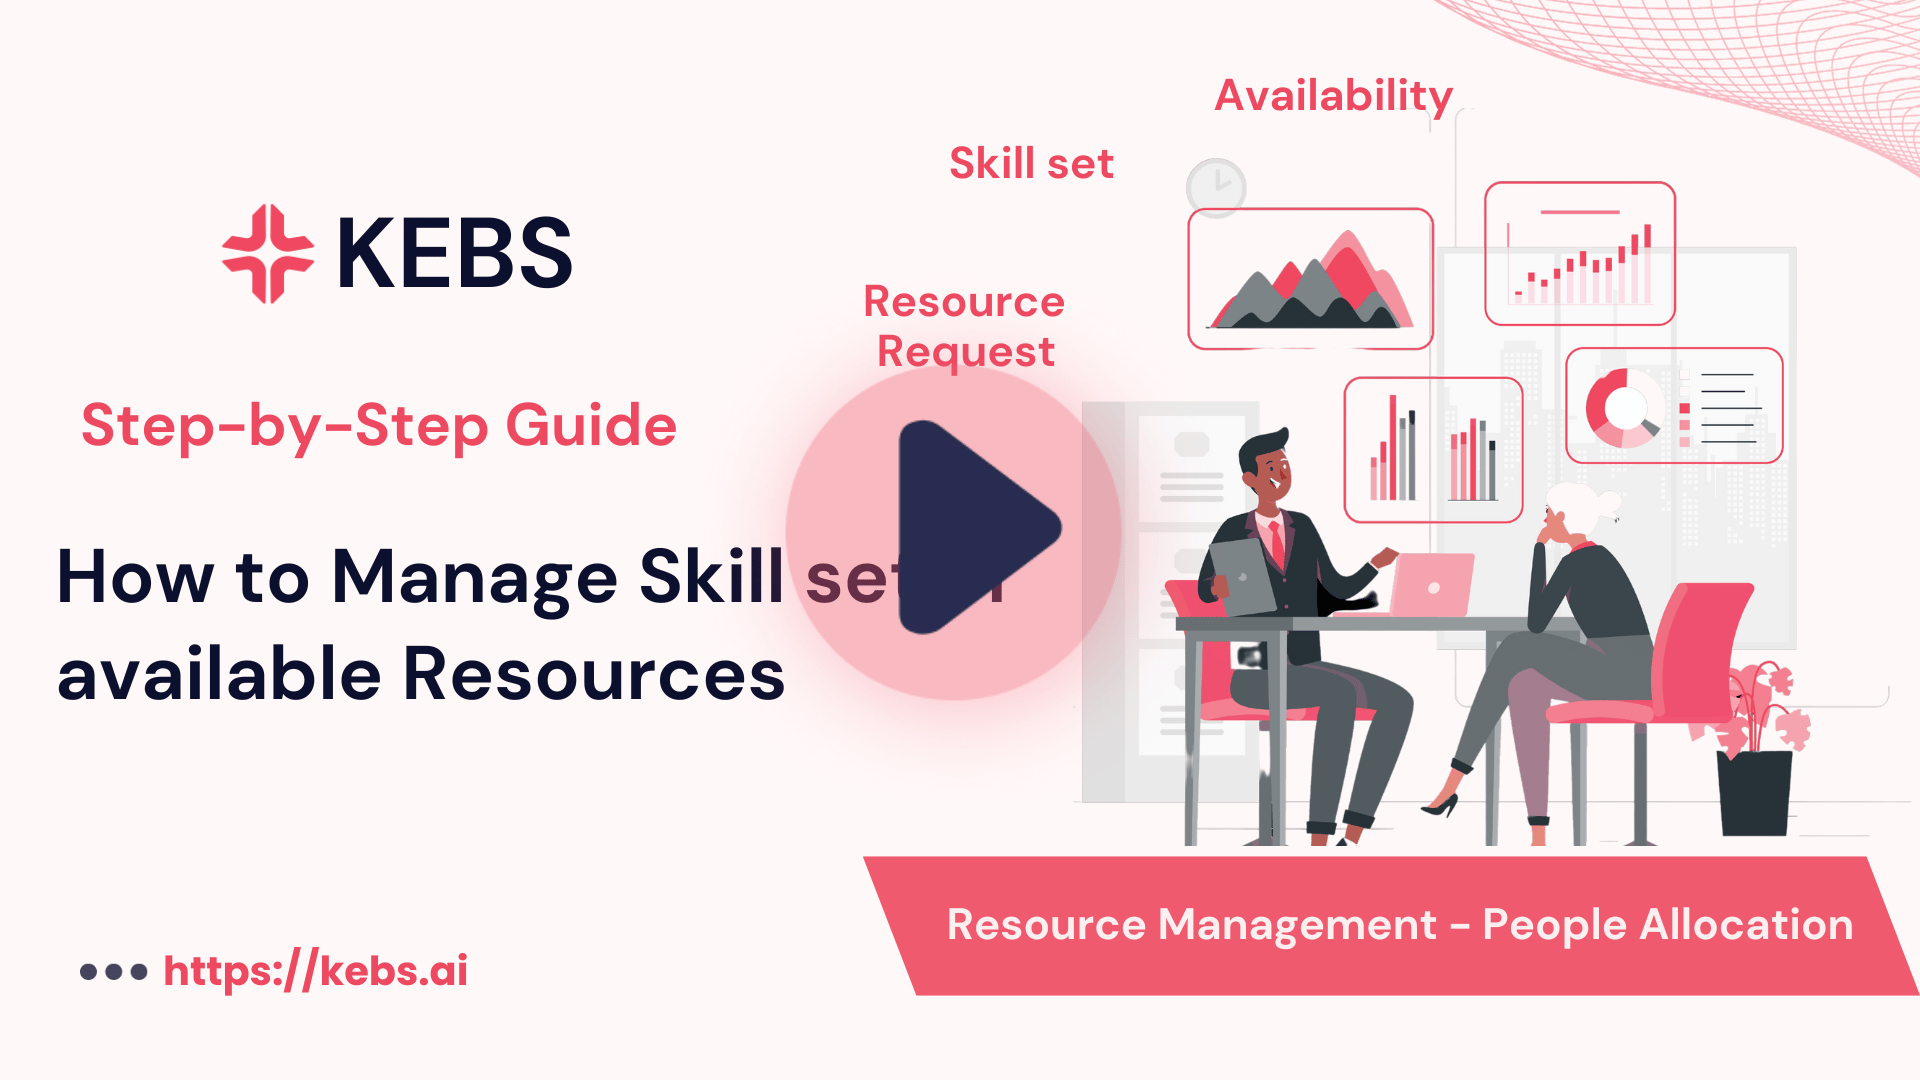 How to Manage Skill set of available Resources